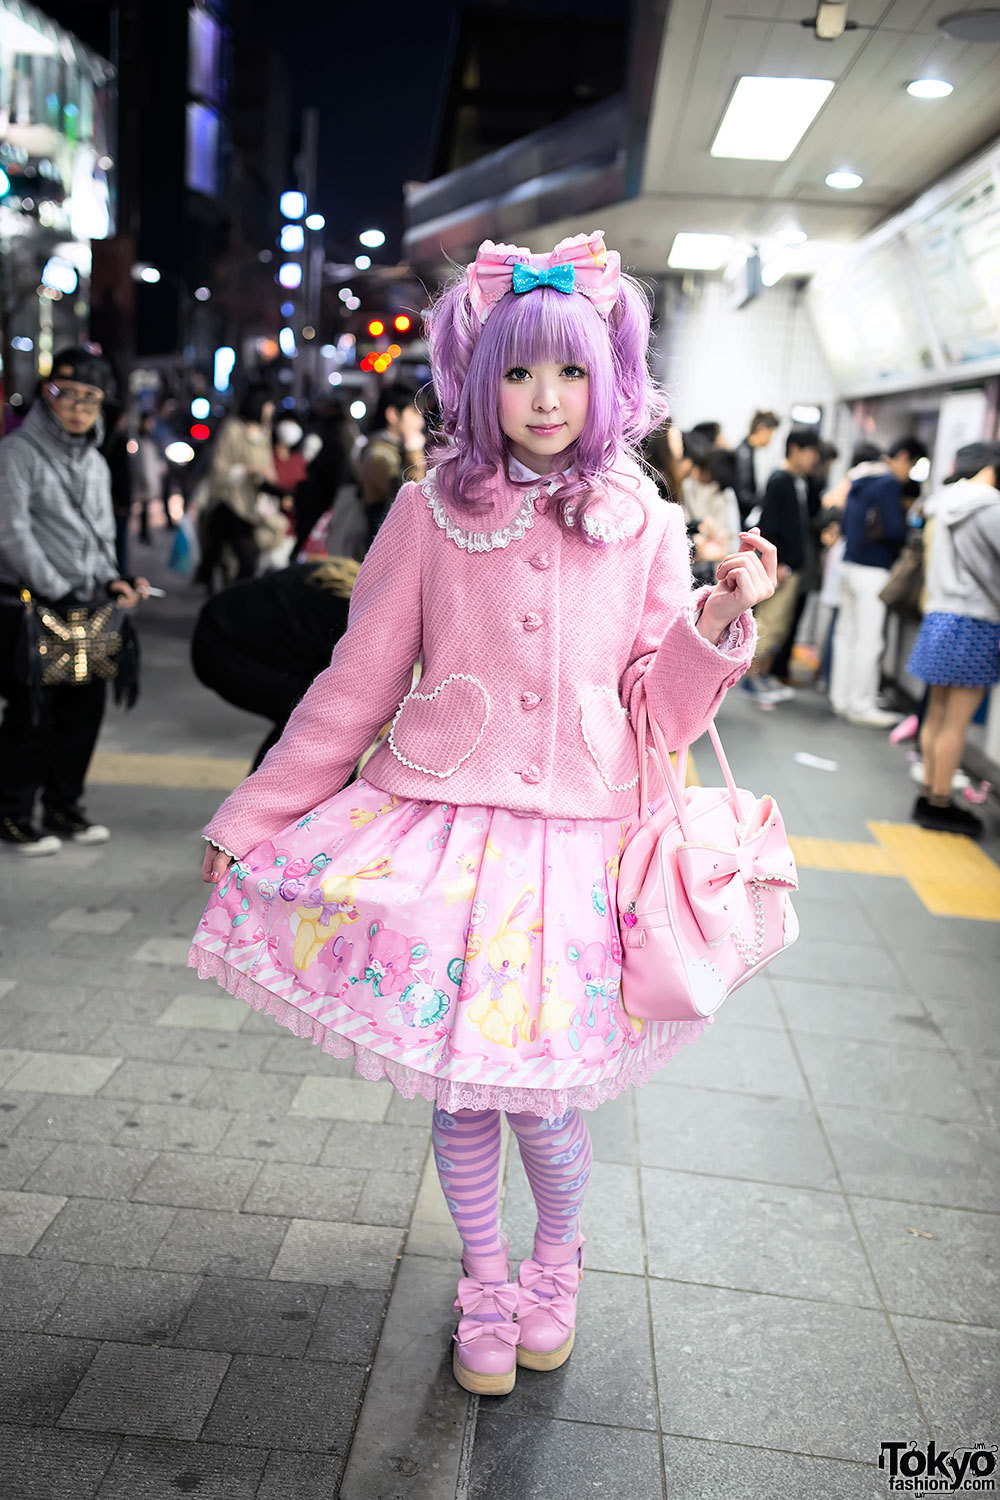 tokyo-fashion:
“ Ran into Moco (designer of Strawberry Planet) at Harajuku Station. She embodies the word “kawaii” and she’s always so sweet too!
”